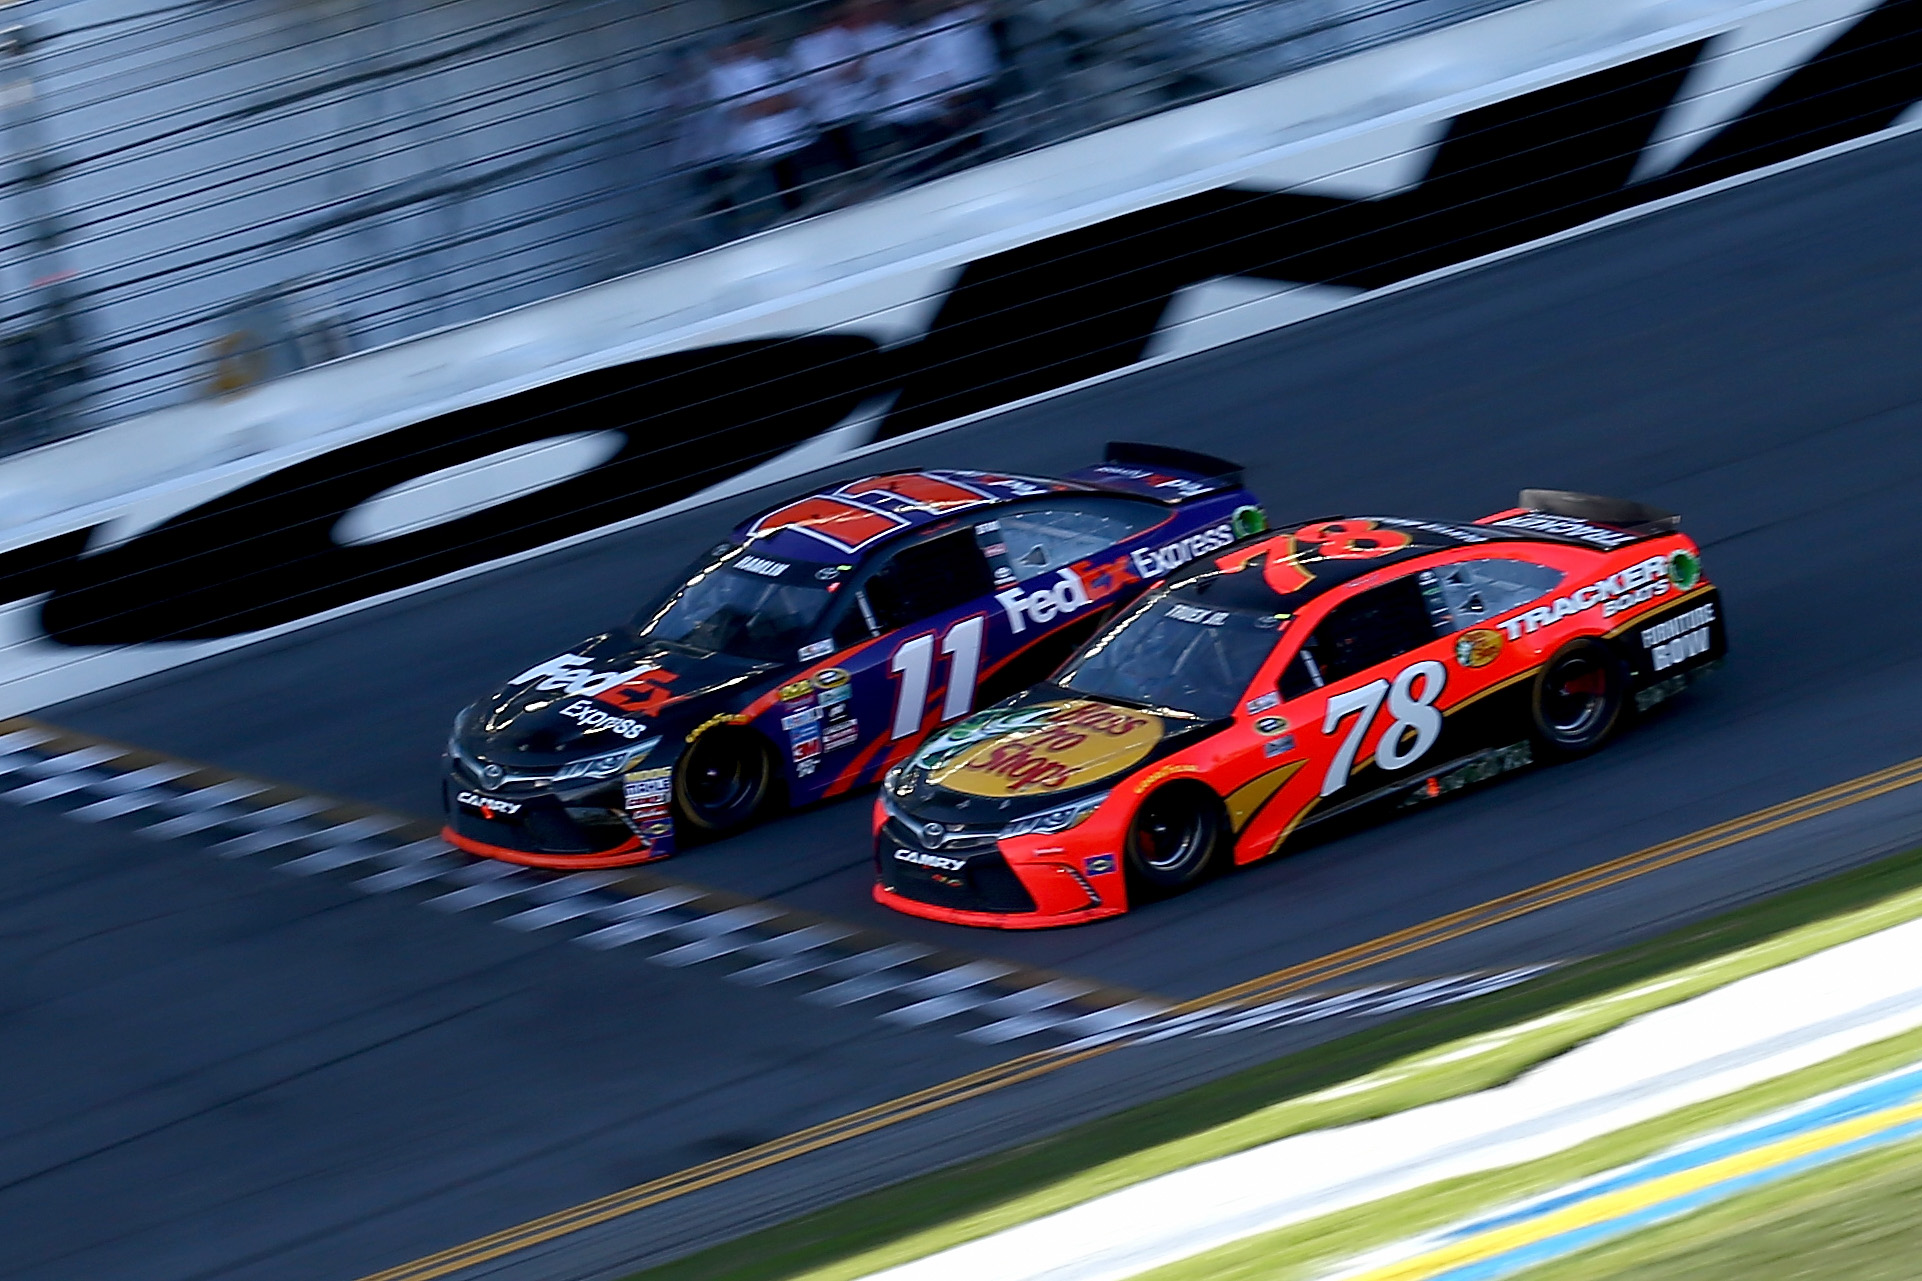 Denny Hamlin, driver of the #11 FedEx Express Toyota, takes the checkered flag ahead of Martin Truex Jr., driver of the #78 Bass Pro Shops/Tracker Boats Toyota, to win the NASCAR Sprint Cup Series Daytona 500 on Feb. 21, 2016 in Daytona Beach, Fla. (Sarah Crabill—NASCAR /Getty Images)